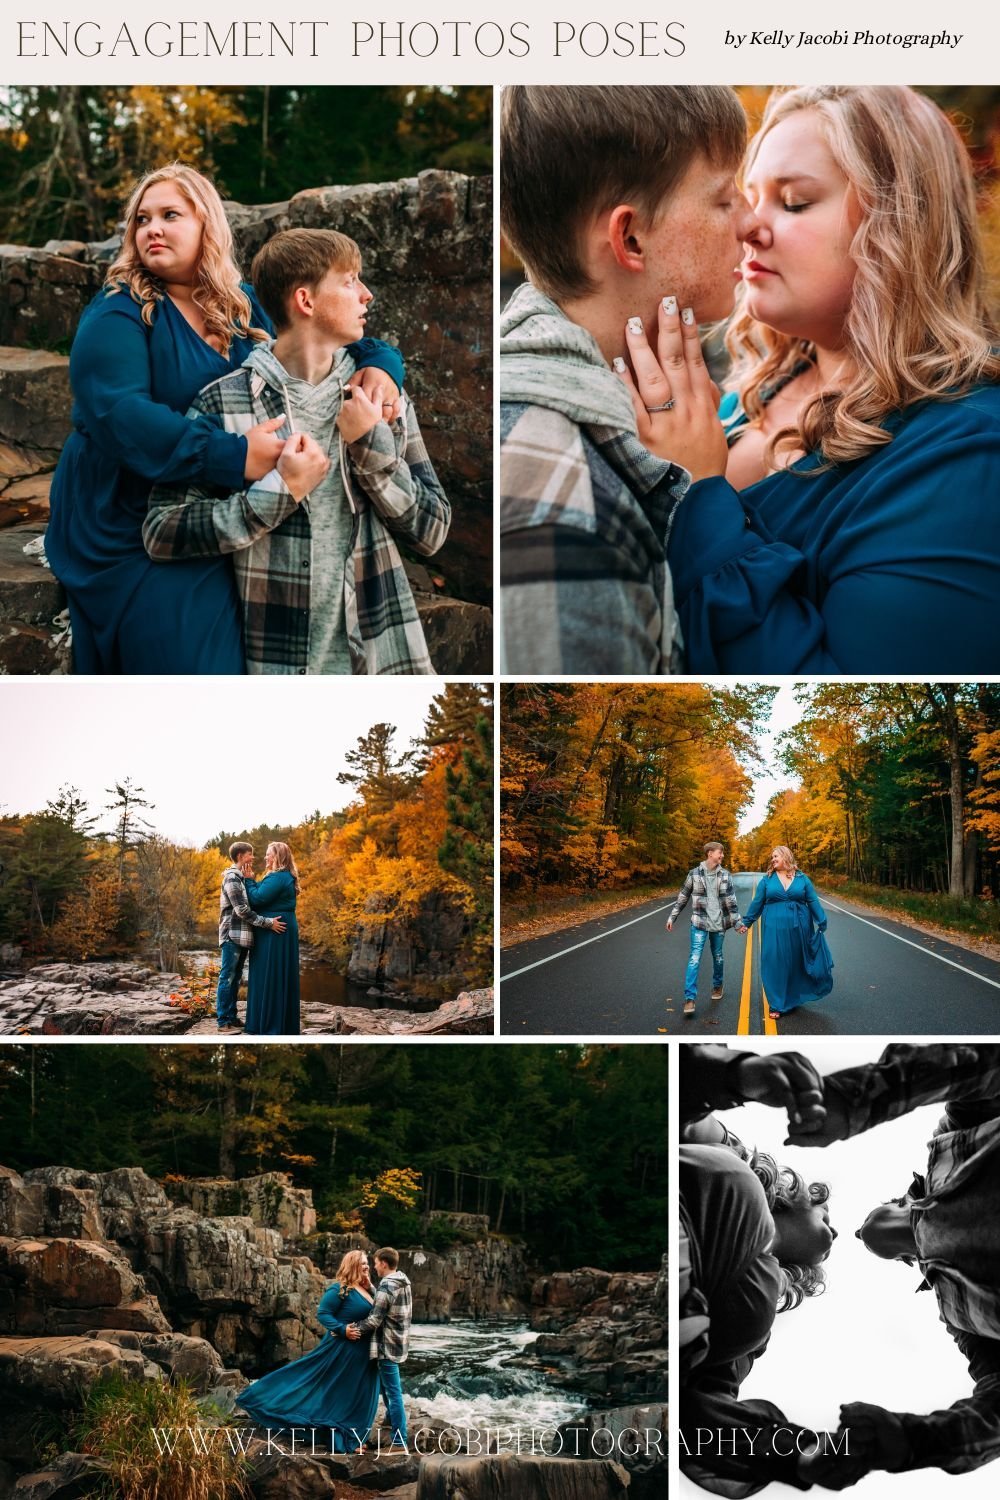 What to Wear for Engagement Photos, Engagement Photo outfits, Wisconsin engagement photographer, fall engagement photos